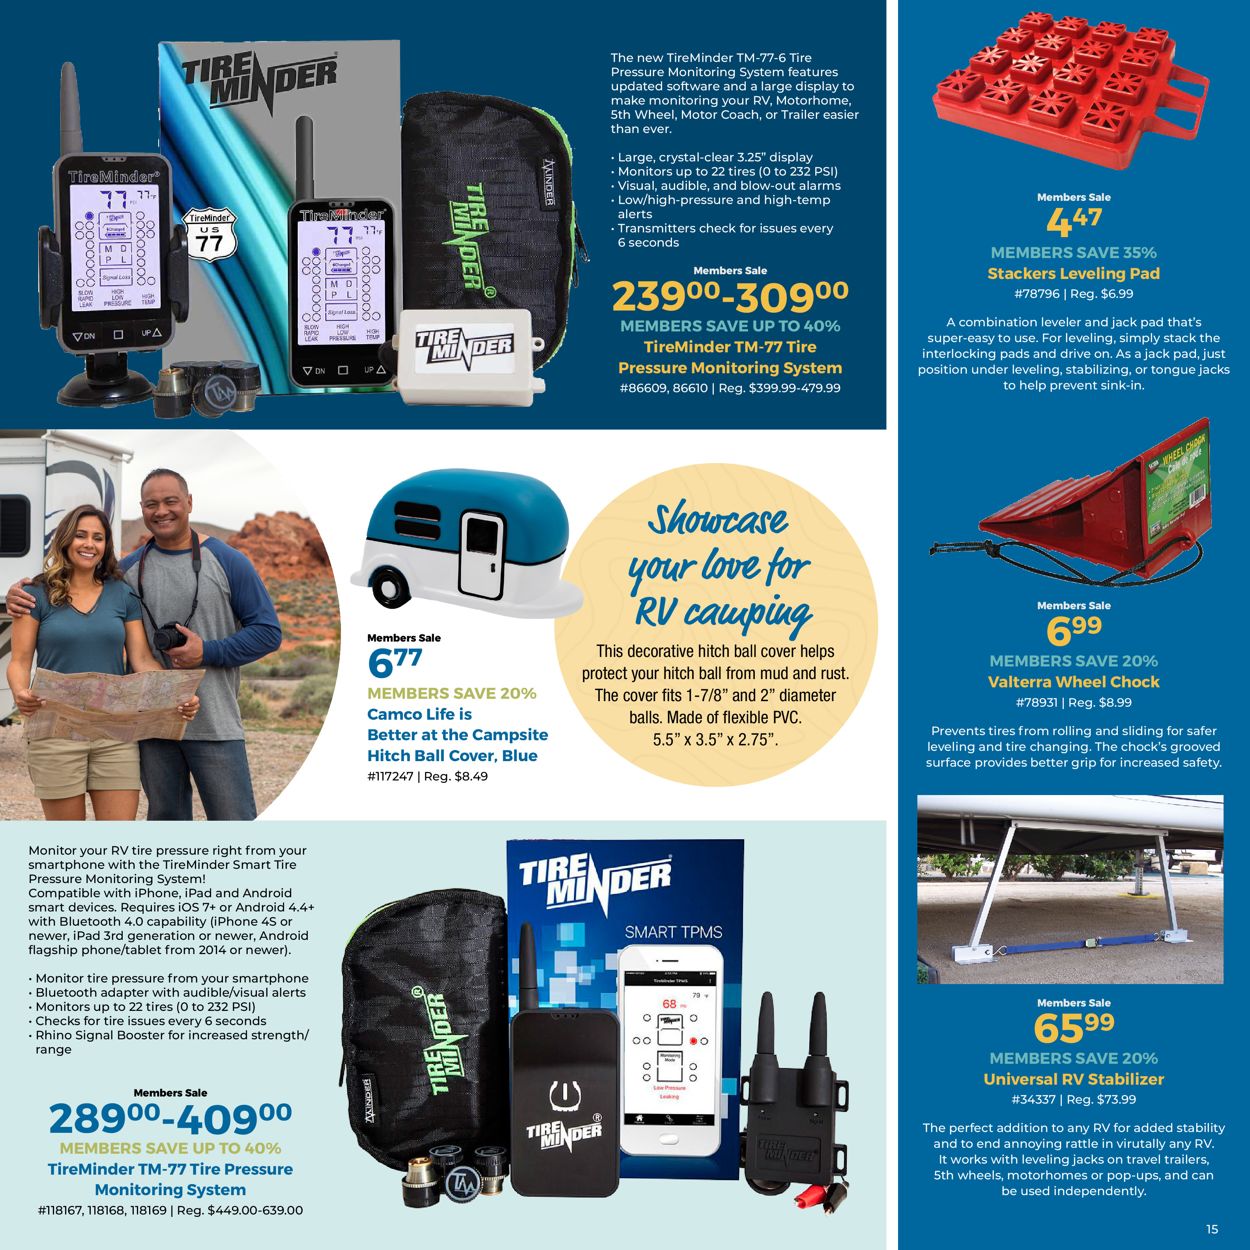 Camping World Ad from 02/28/2022